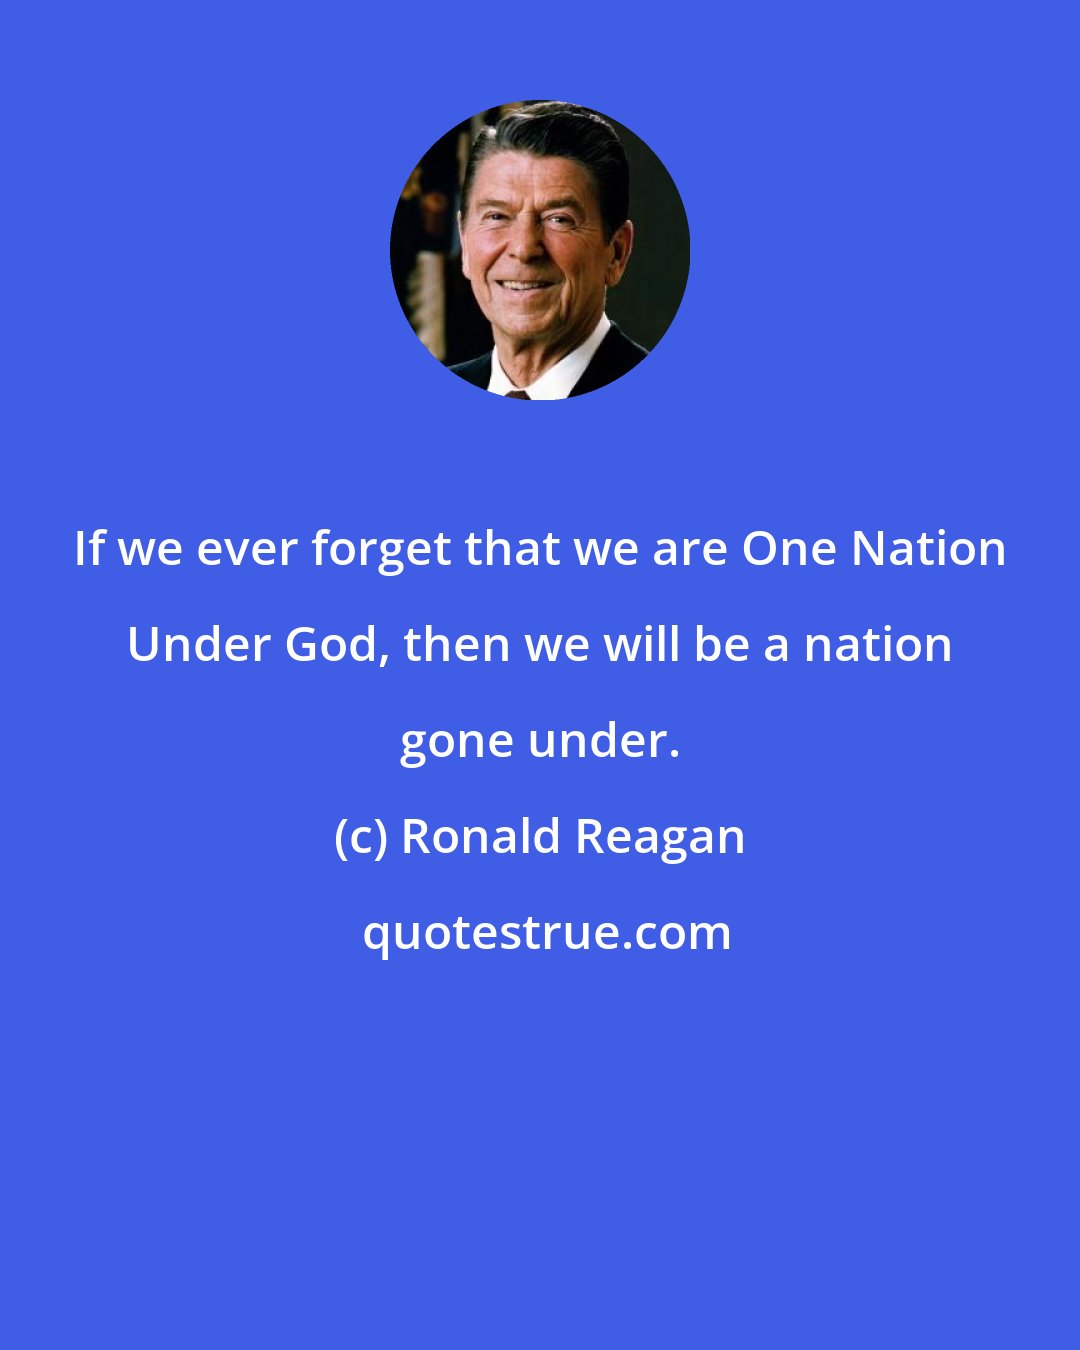 Ronald Reagan: If we ever forget that we are One Nation Under God, then we will be a nation gone under.